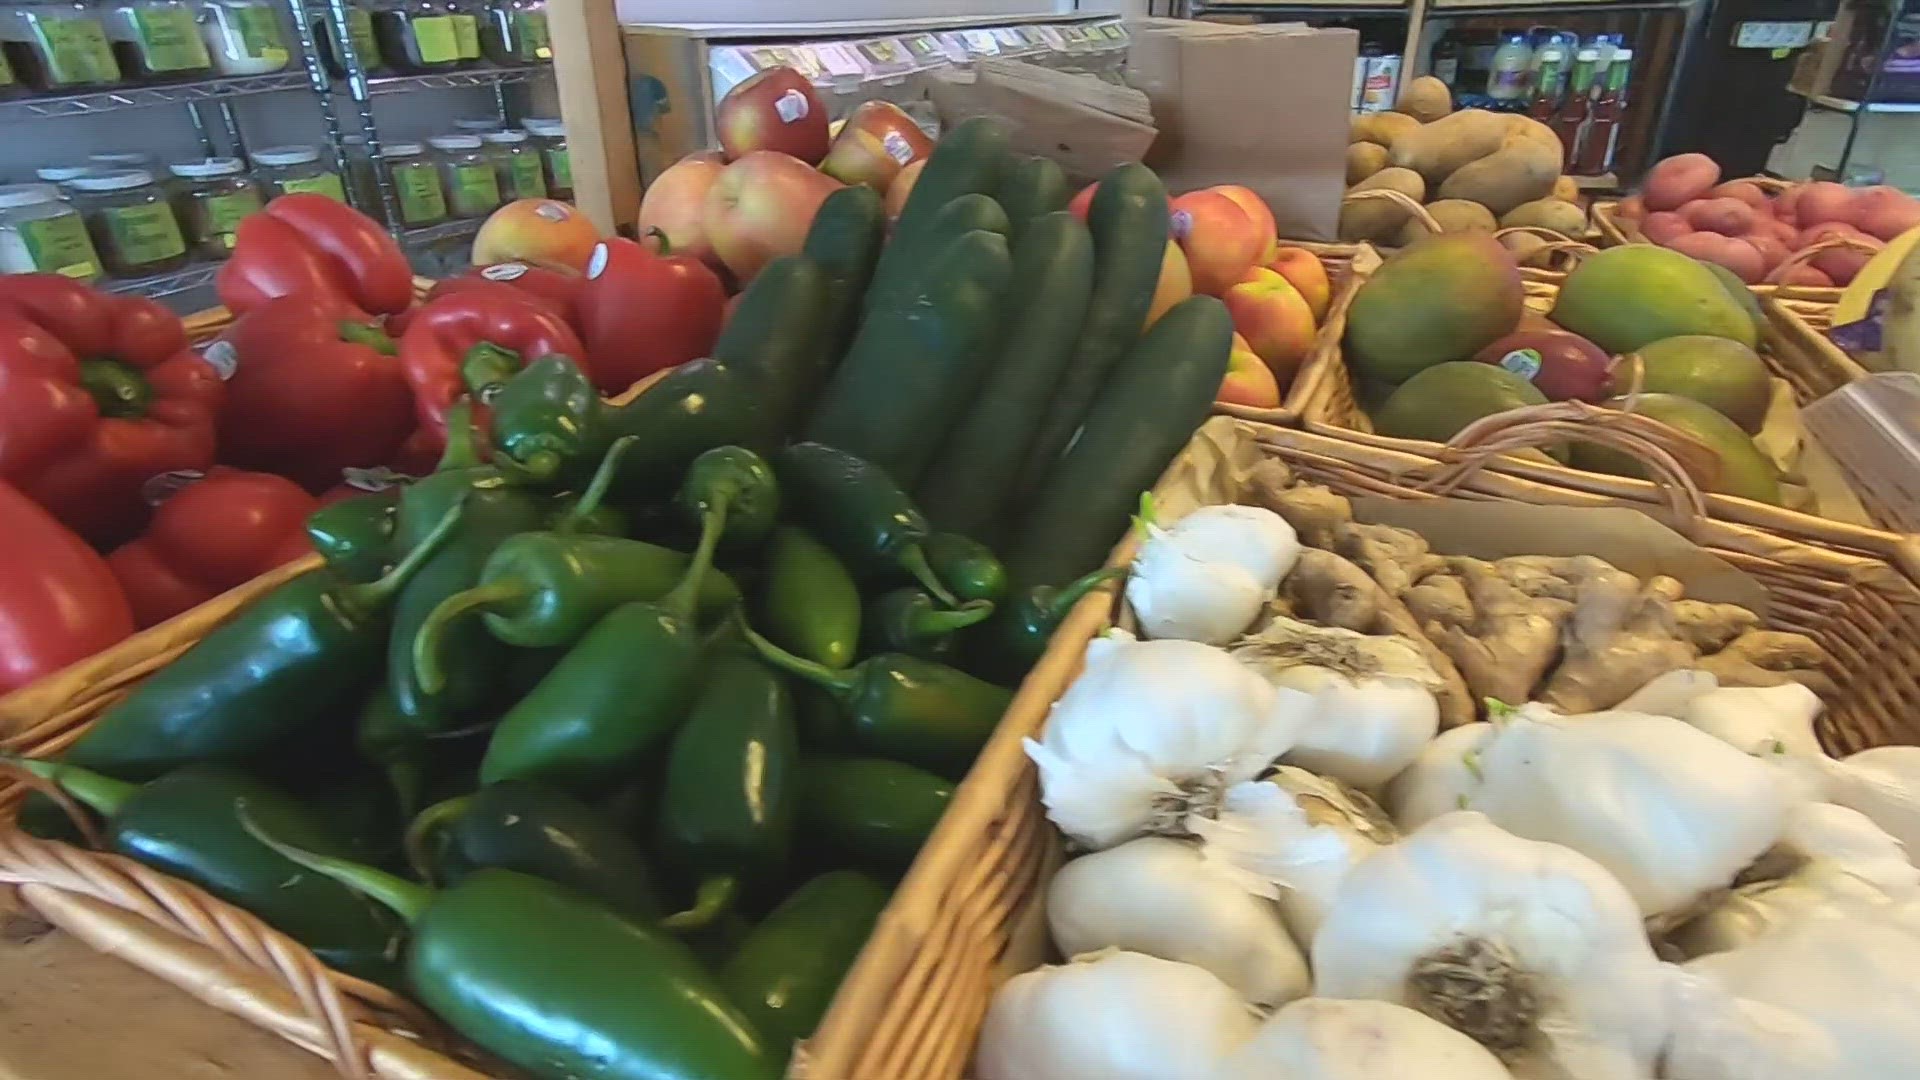 MARSH Grocery Cooperative in the Carondelet neighborhood is trying to change the way communities have access to healthy food. It's tackling a root problem.